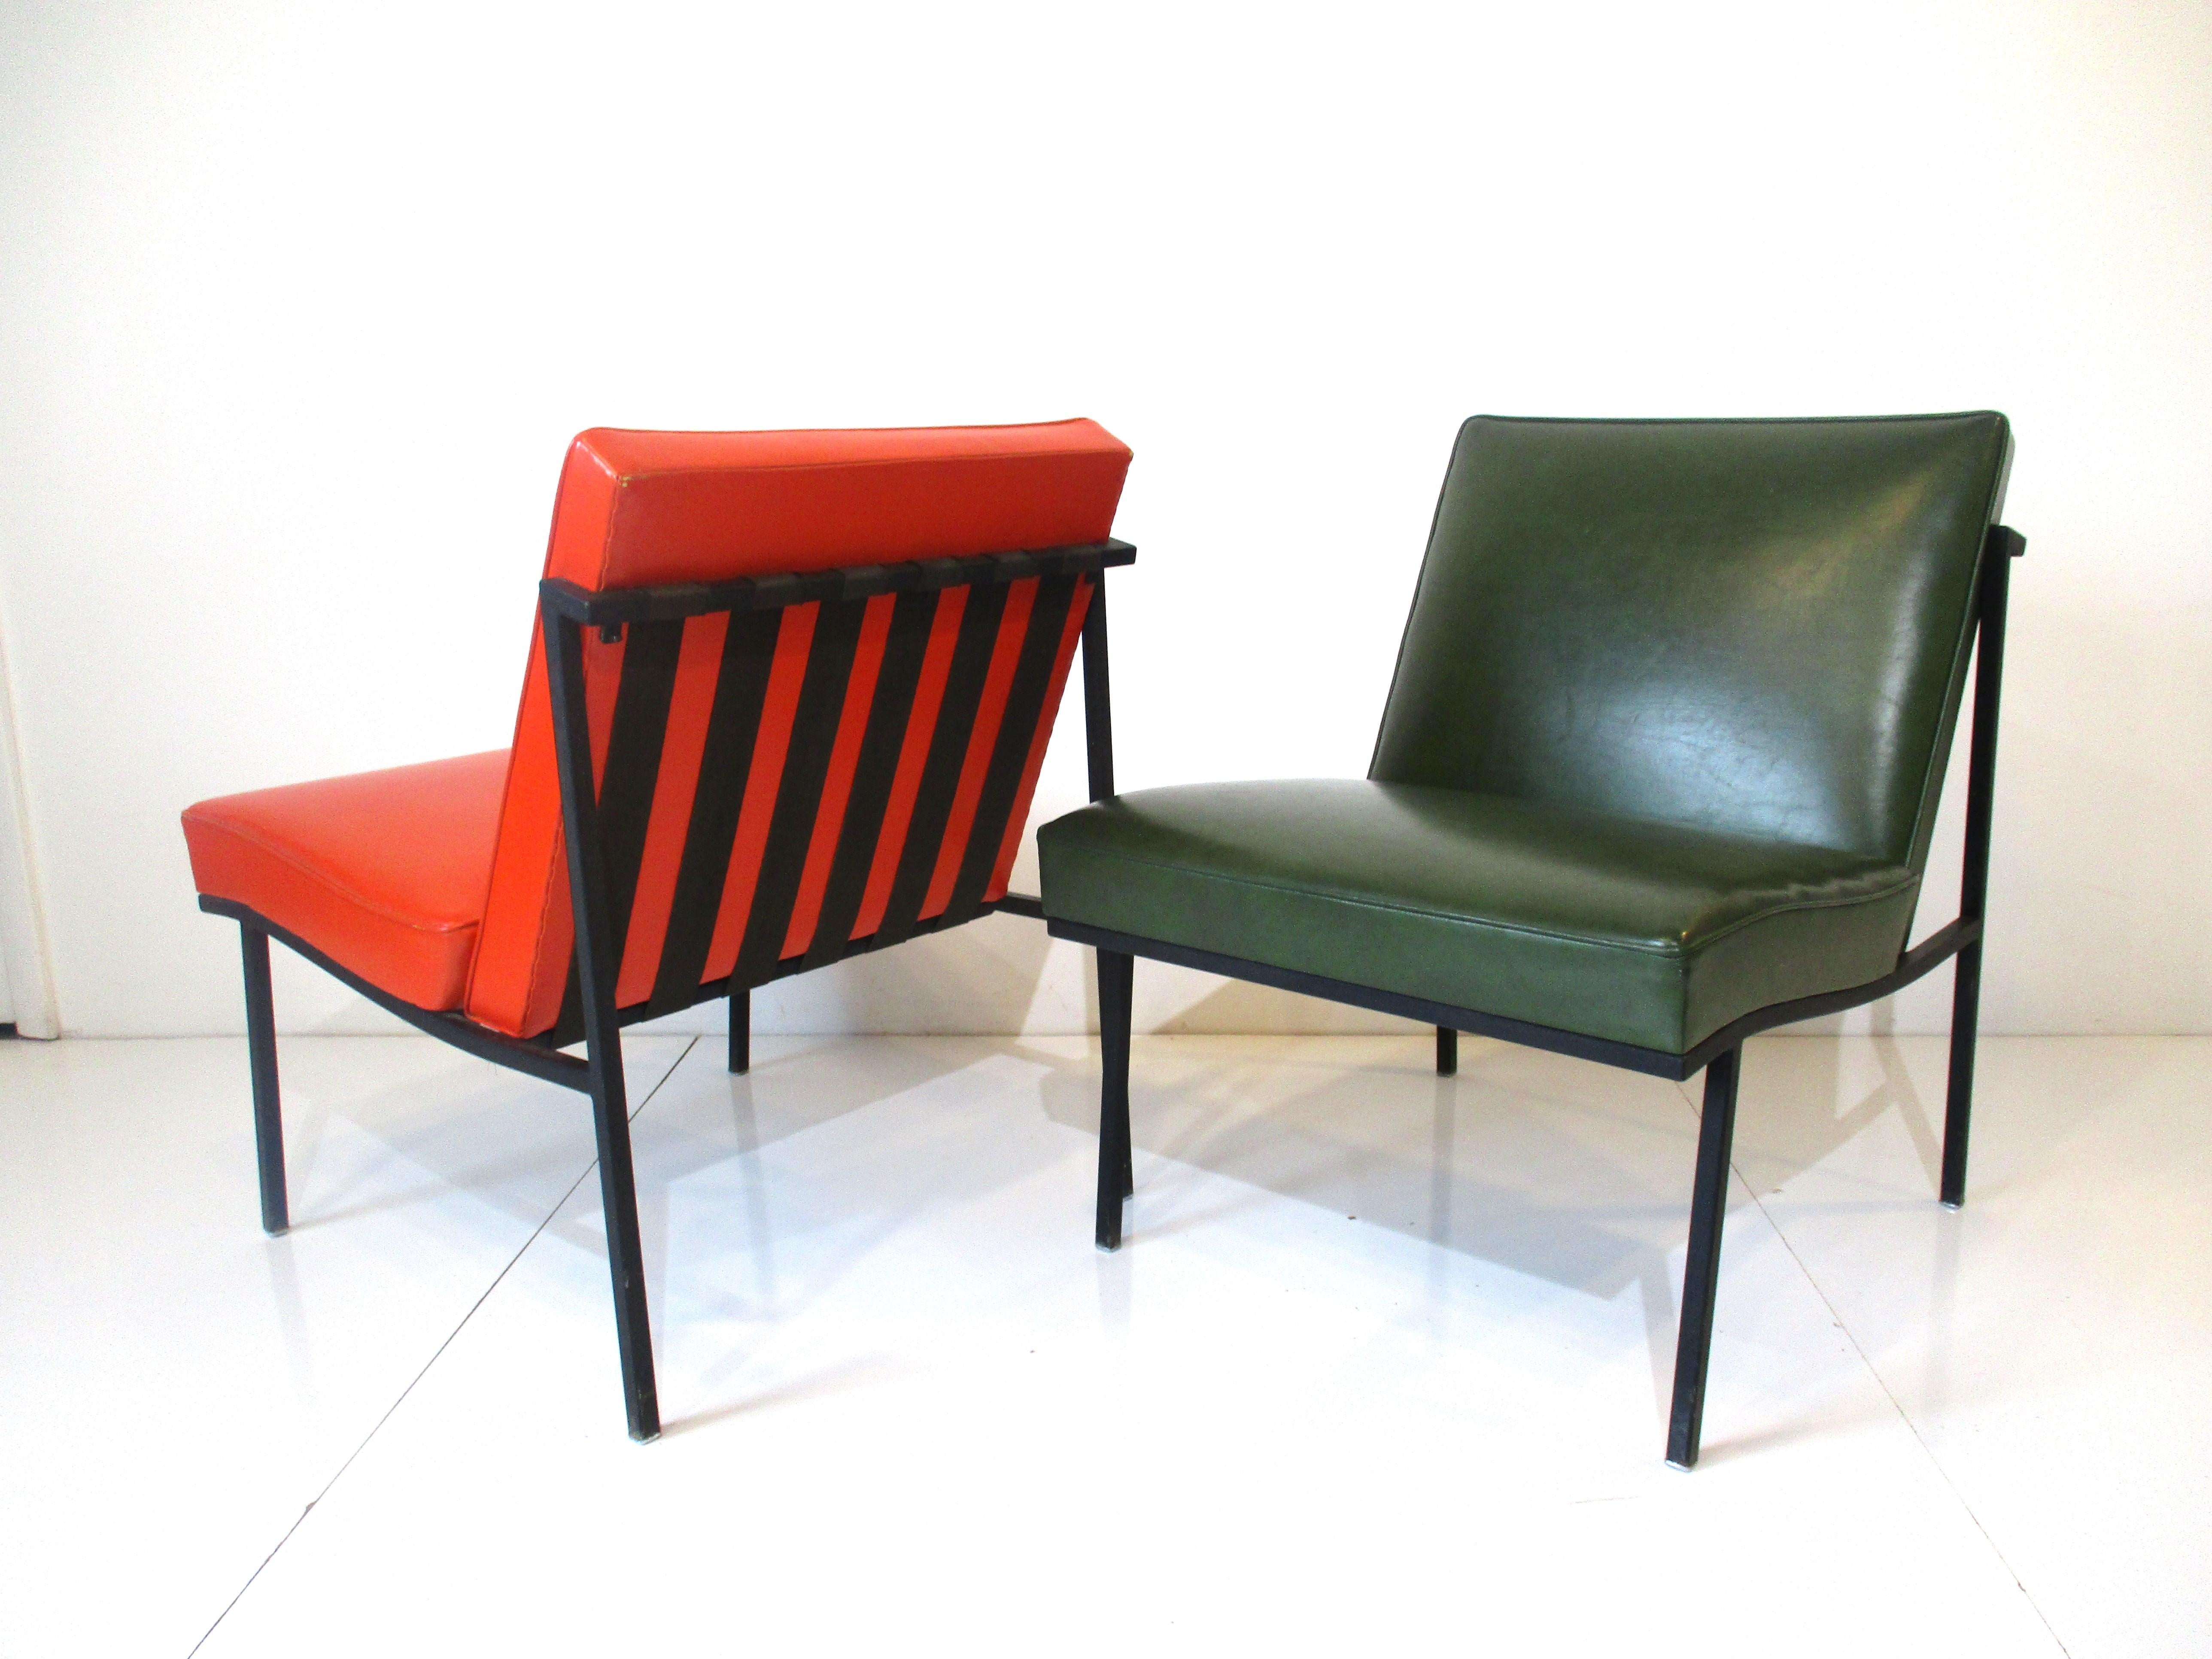 Rare William Armbruster Lounge Chairs MOMA Good Design for Edgewood Co.  5